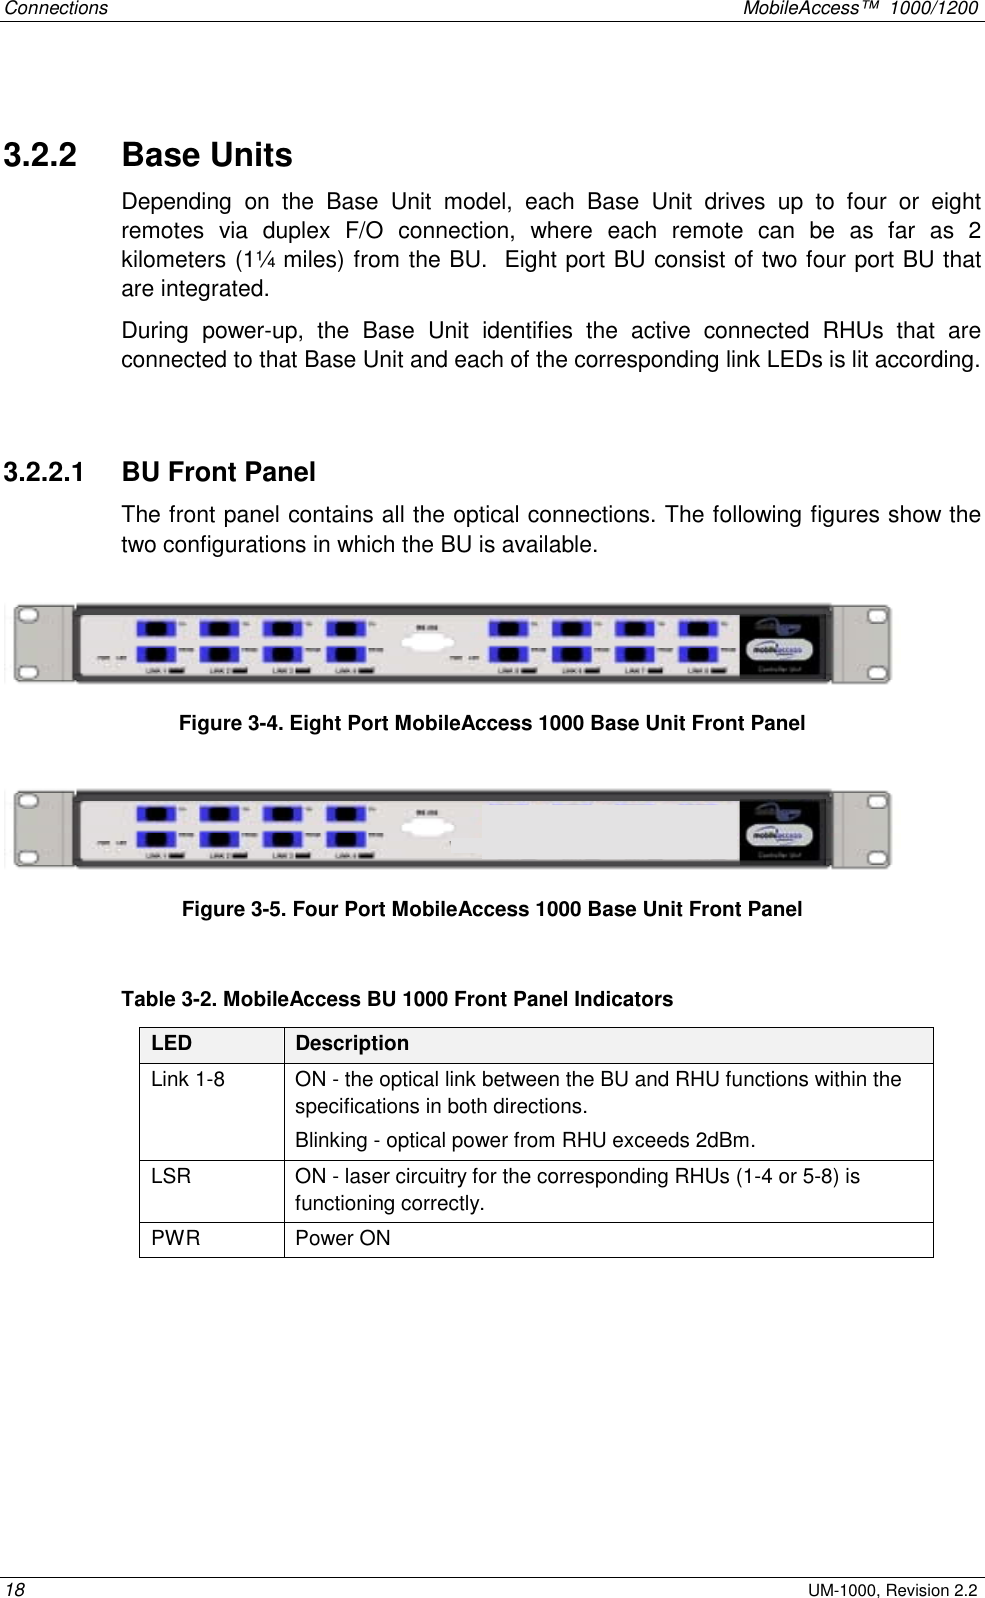 Connections    MobileAccess™  1000/1200 18 UM-1000, Revision 2.2  3.2.2   Base Units Depending on the Base Unit model, each Base Unit drives up to four or eight remotes via duplex F/O connection, where each remote can be as far as 2 kilometers (1¼ miles) from the BU.  Eight port BU consist of two four port BU that are integrated.  During power-up, the Base Unit identifies the active connected RHUs that are connected to that Base Unit and each of the corresponding link LEDs is lit according.  3.2.2.1   BU Front Panel The front panel contains all the optical connections. The following figures show the two configurations in which the BU is available.   Figure  3-4. Eight Port MobileAccess 1000 Base Unit Front Panel  Figure  3-5. Four Port MobileAccess 1000 Base Unit Front Panel  Table  3-2. MobileAccess BU 1000 Front Panel Indicators LED  Description Link 1-8  ON - the optical link between the BU and RHU functions within the specifications in both directions.  Blinking - optical power from RHU exceeds 2dBm. LSR  ON - laser circuitry for the corresponding RHUs (1-4 or 5-8) is functioning correctly. PWR Power ON    